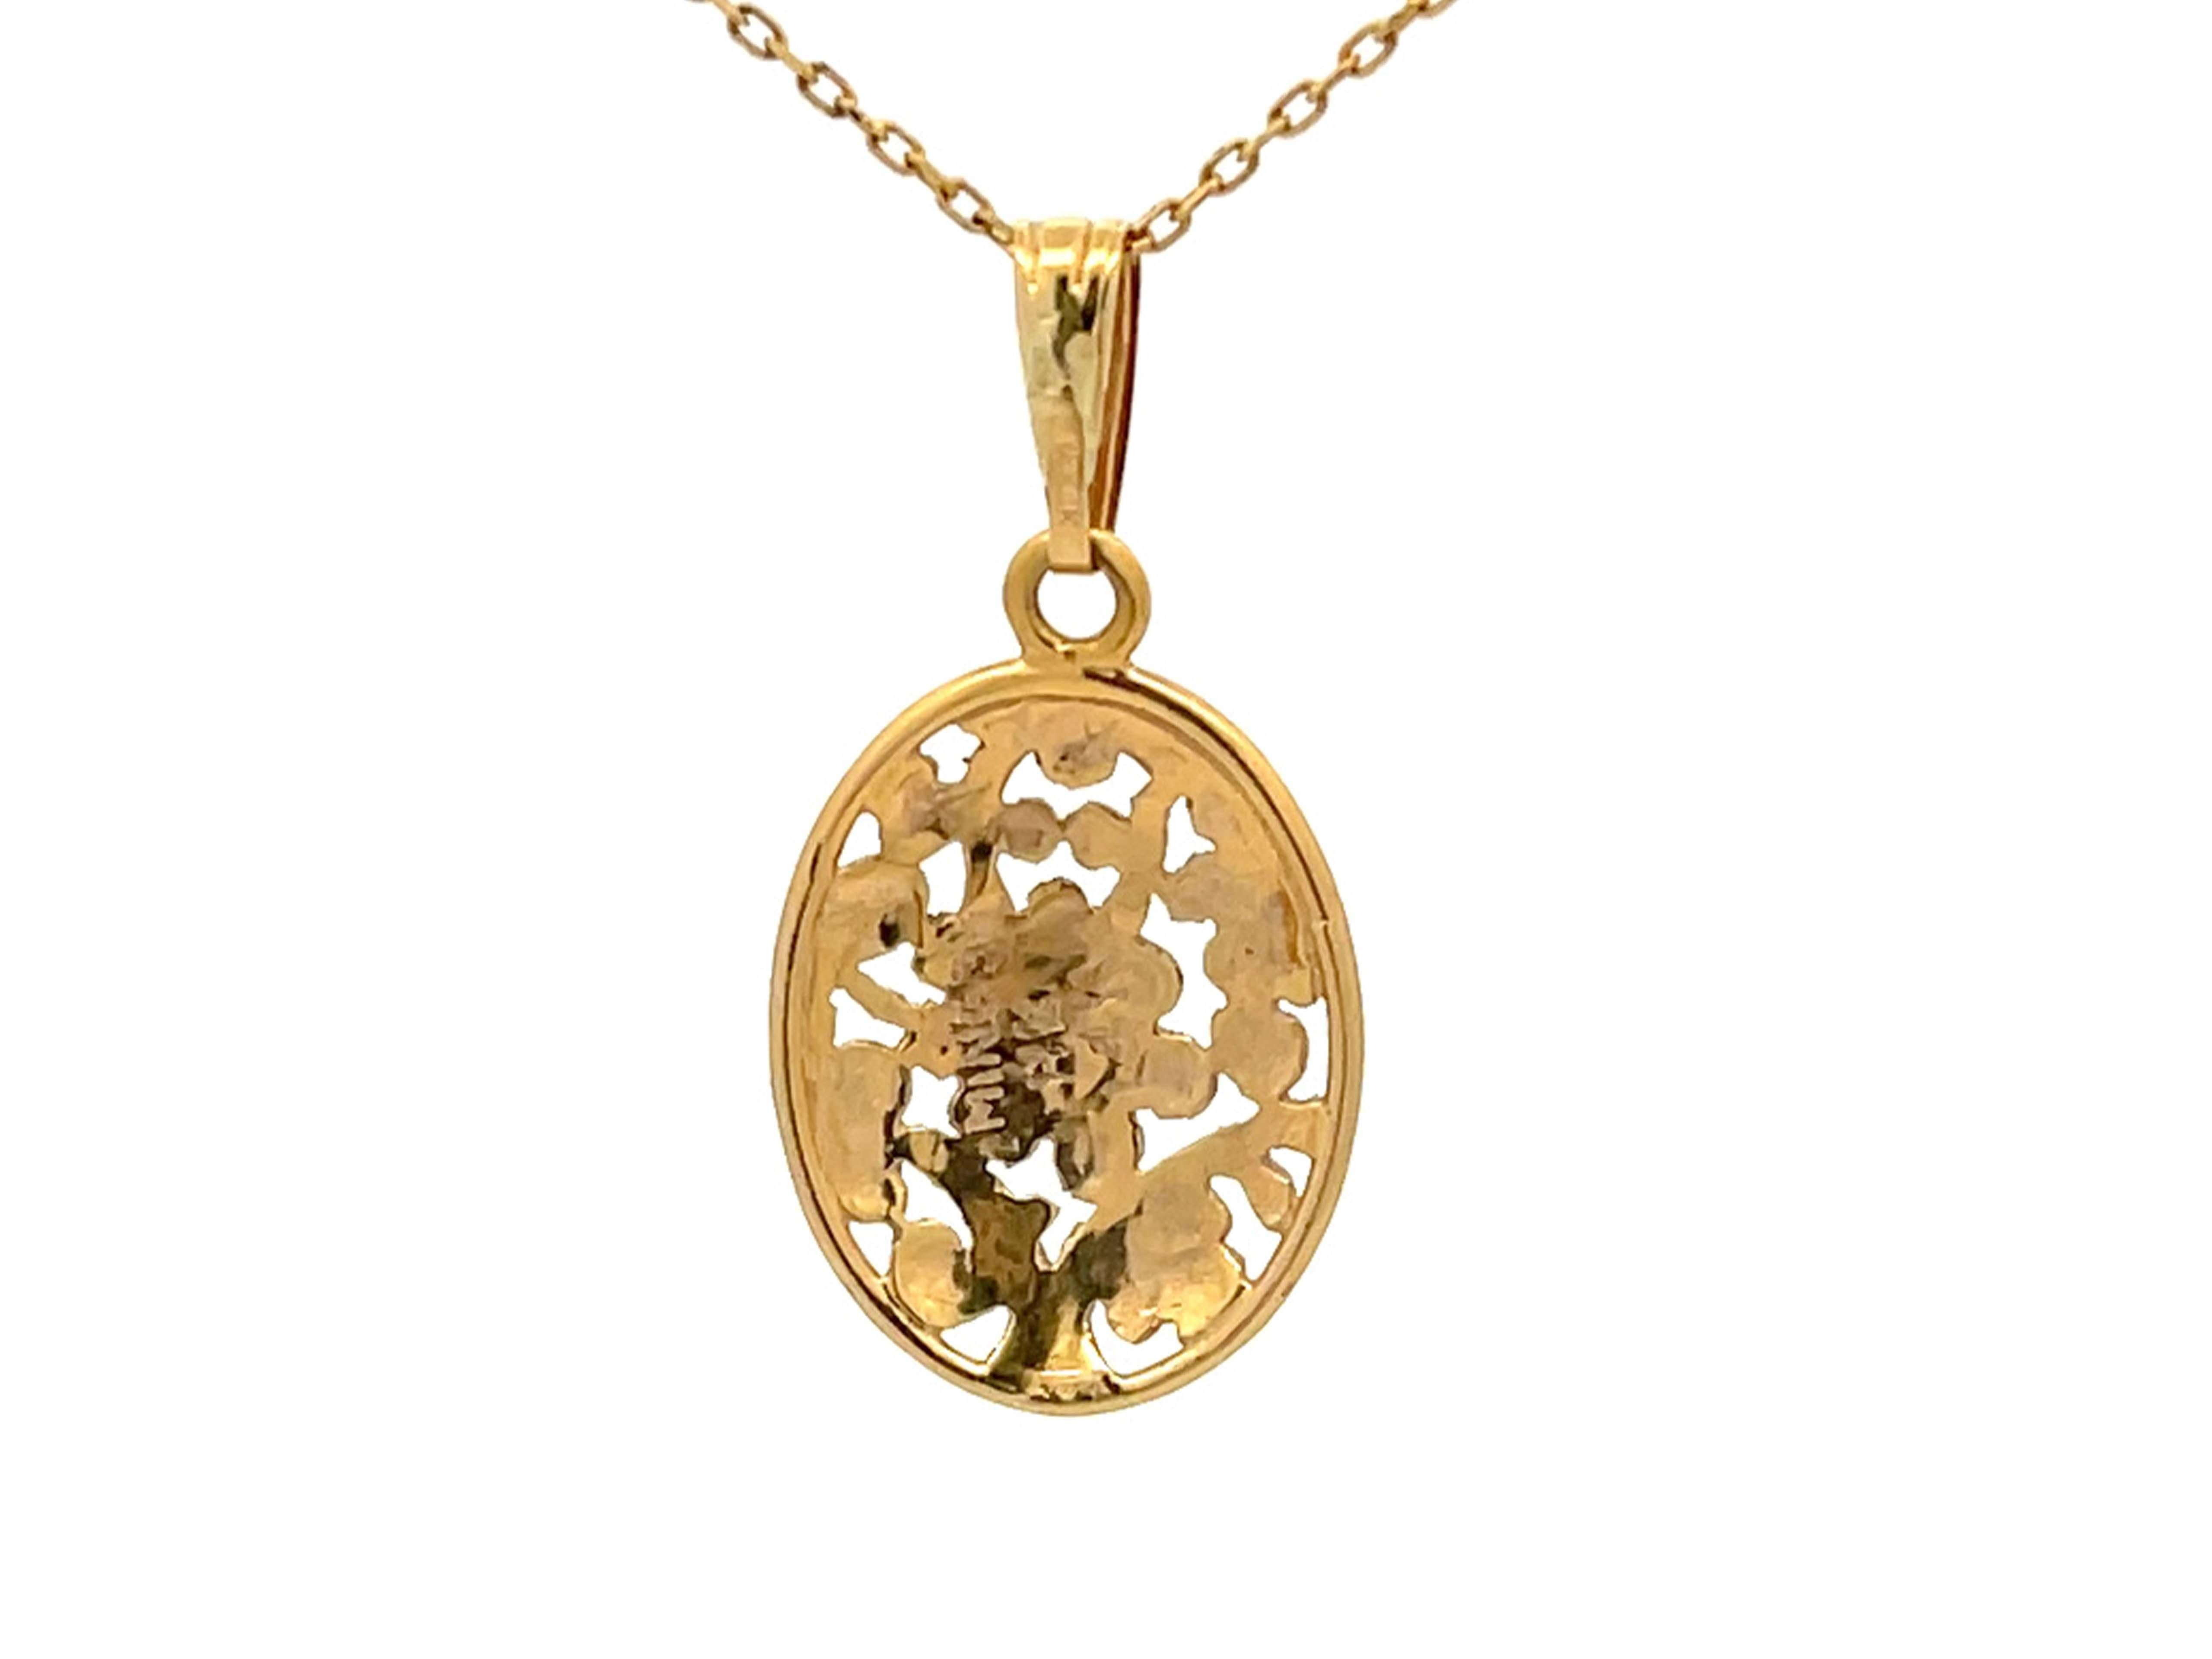 Mings Hawaii Plum Blossom Pierced Oval Pendant in 14k Yellow Gold with Chain 1